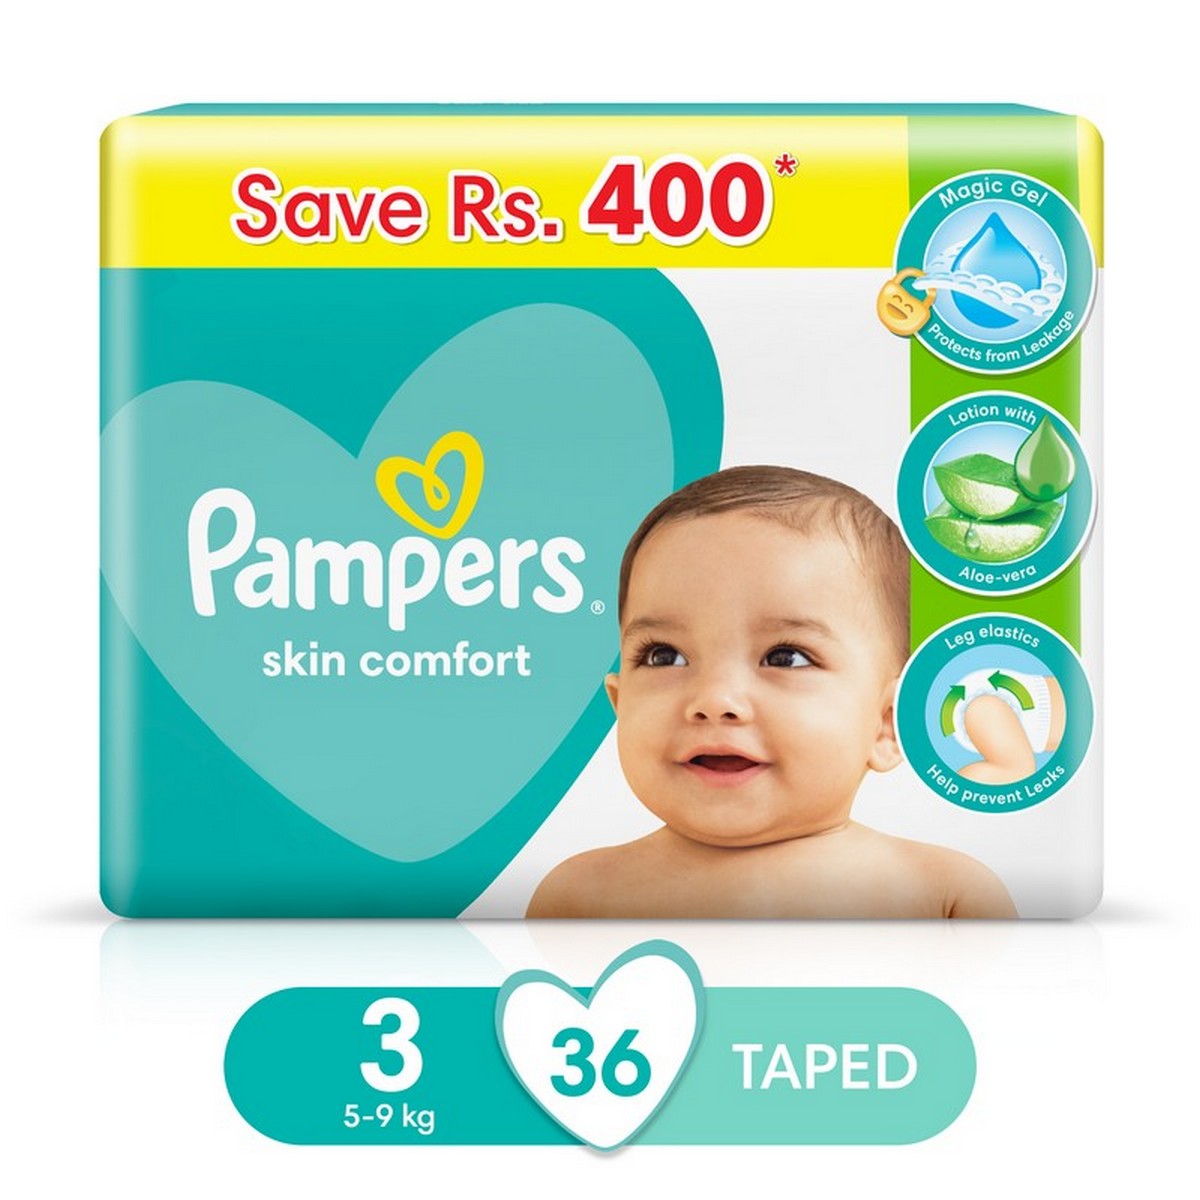 Pampers Baby Dry Diapers Medium Size 3, 36 Count